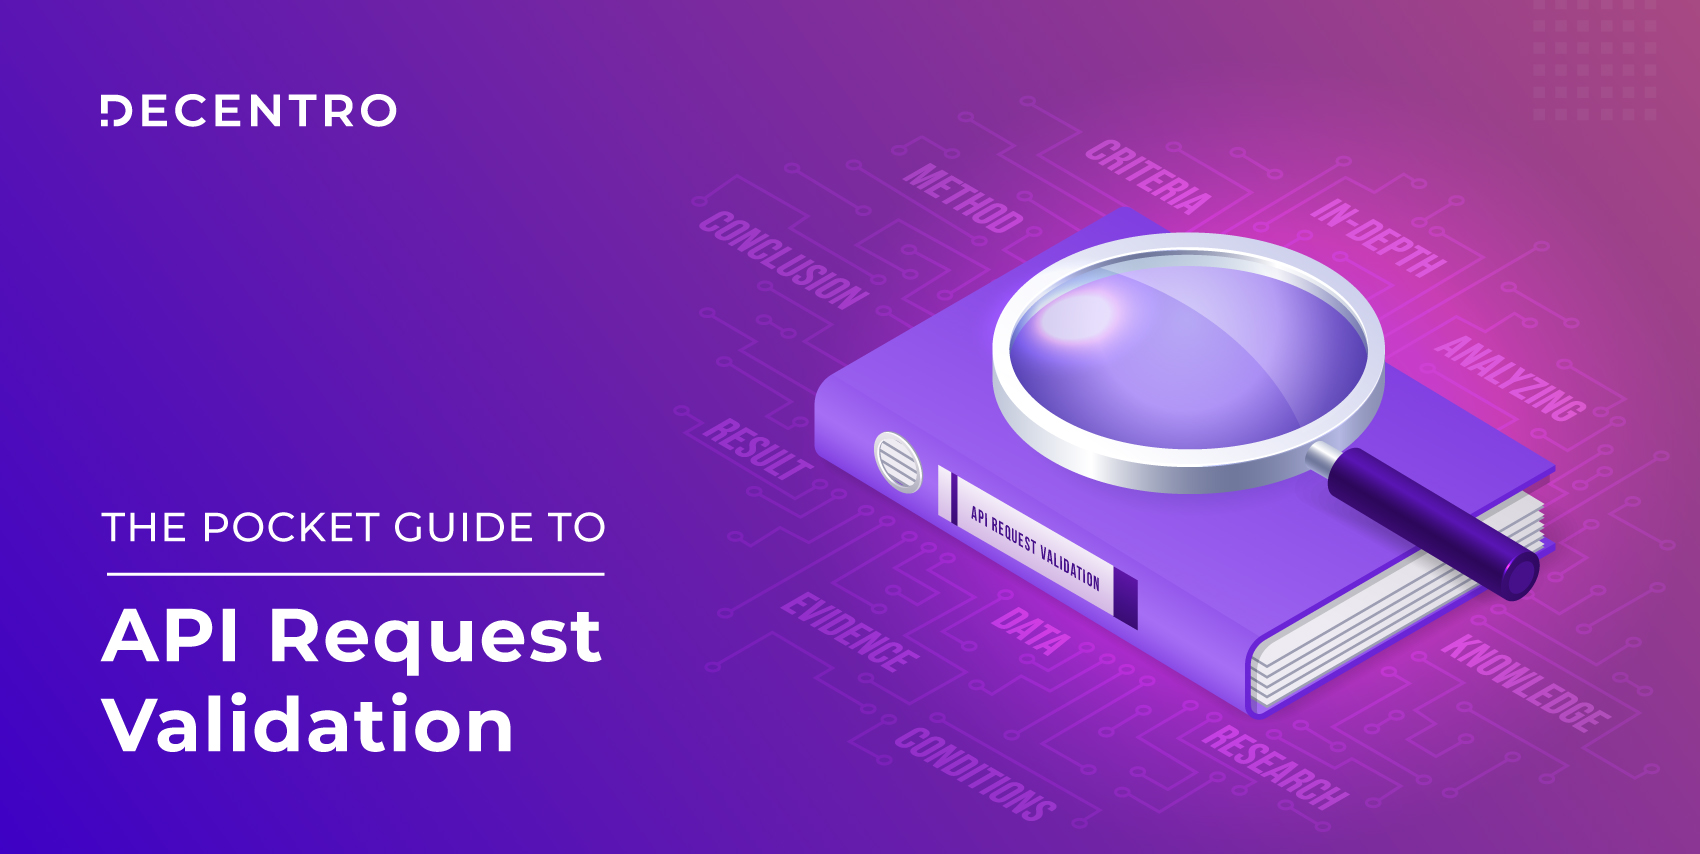 Learn more about API request validation.